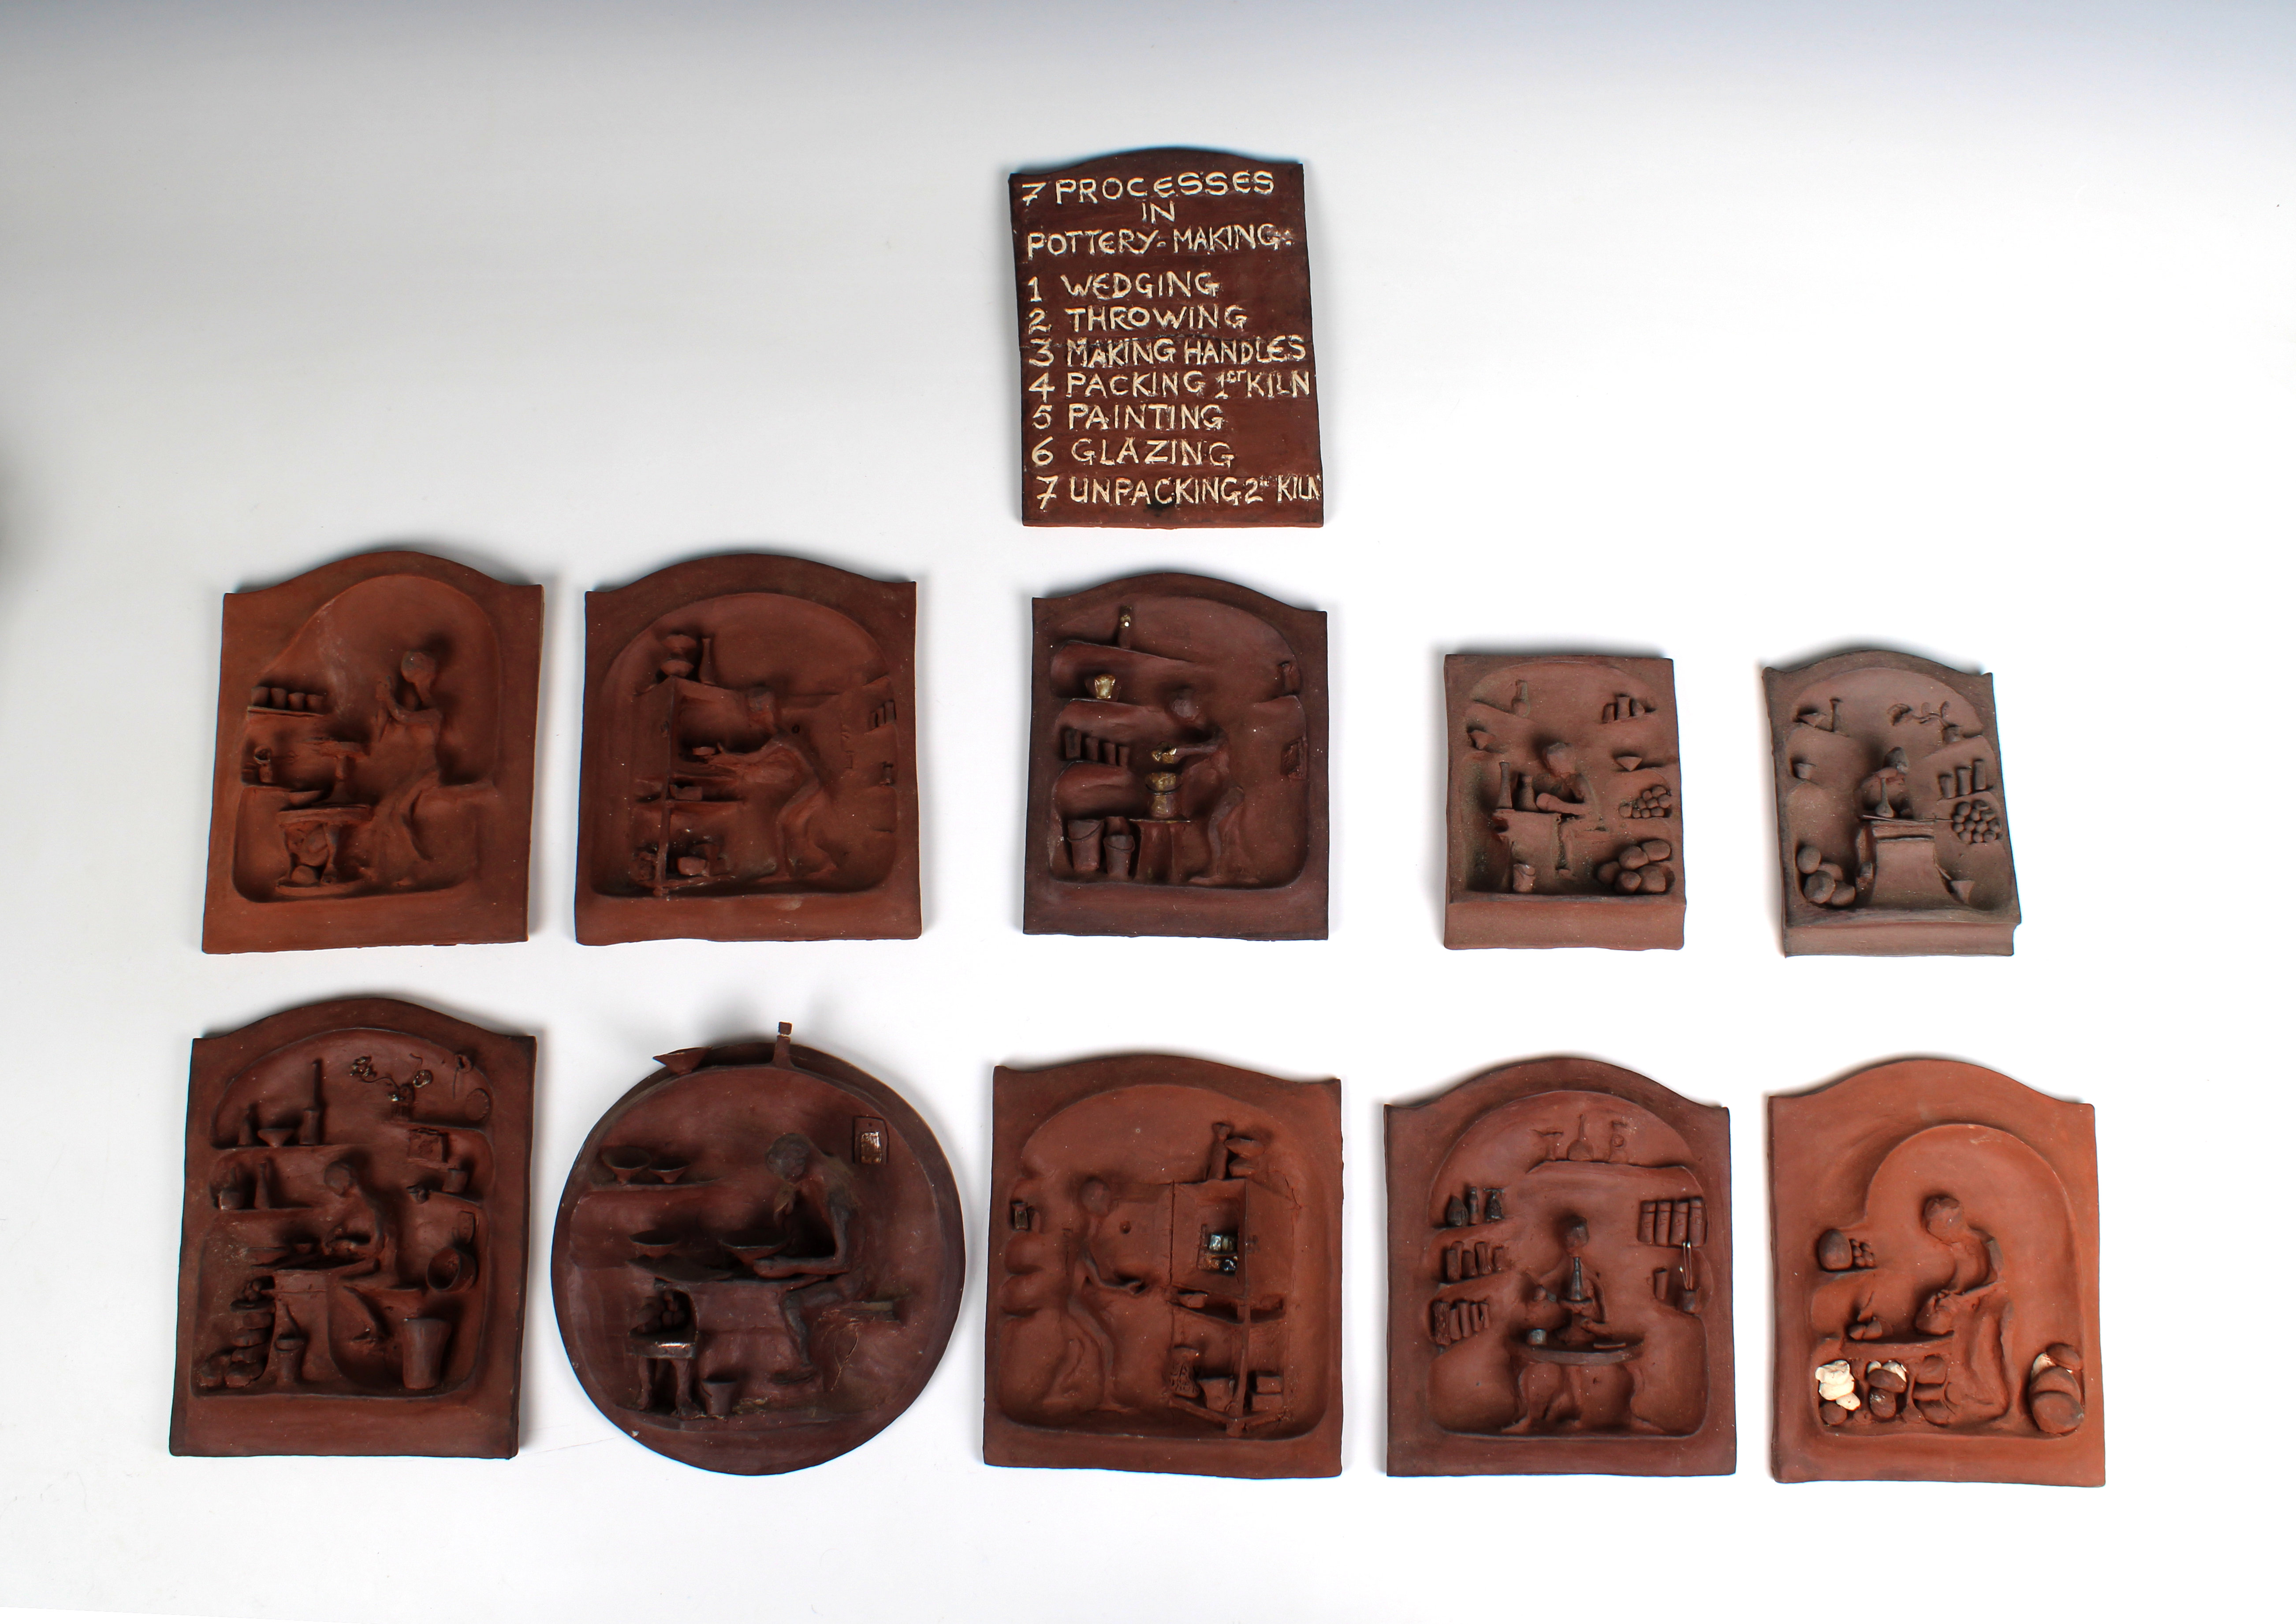 Elizabeth Ann Macphail (1939-89) 7 Processes in Pottery Making' high relief plaques